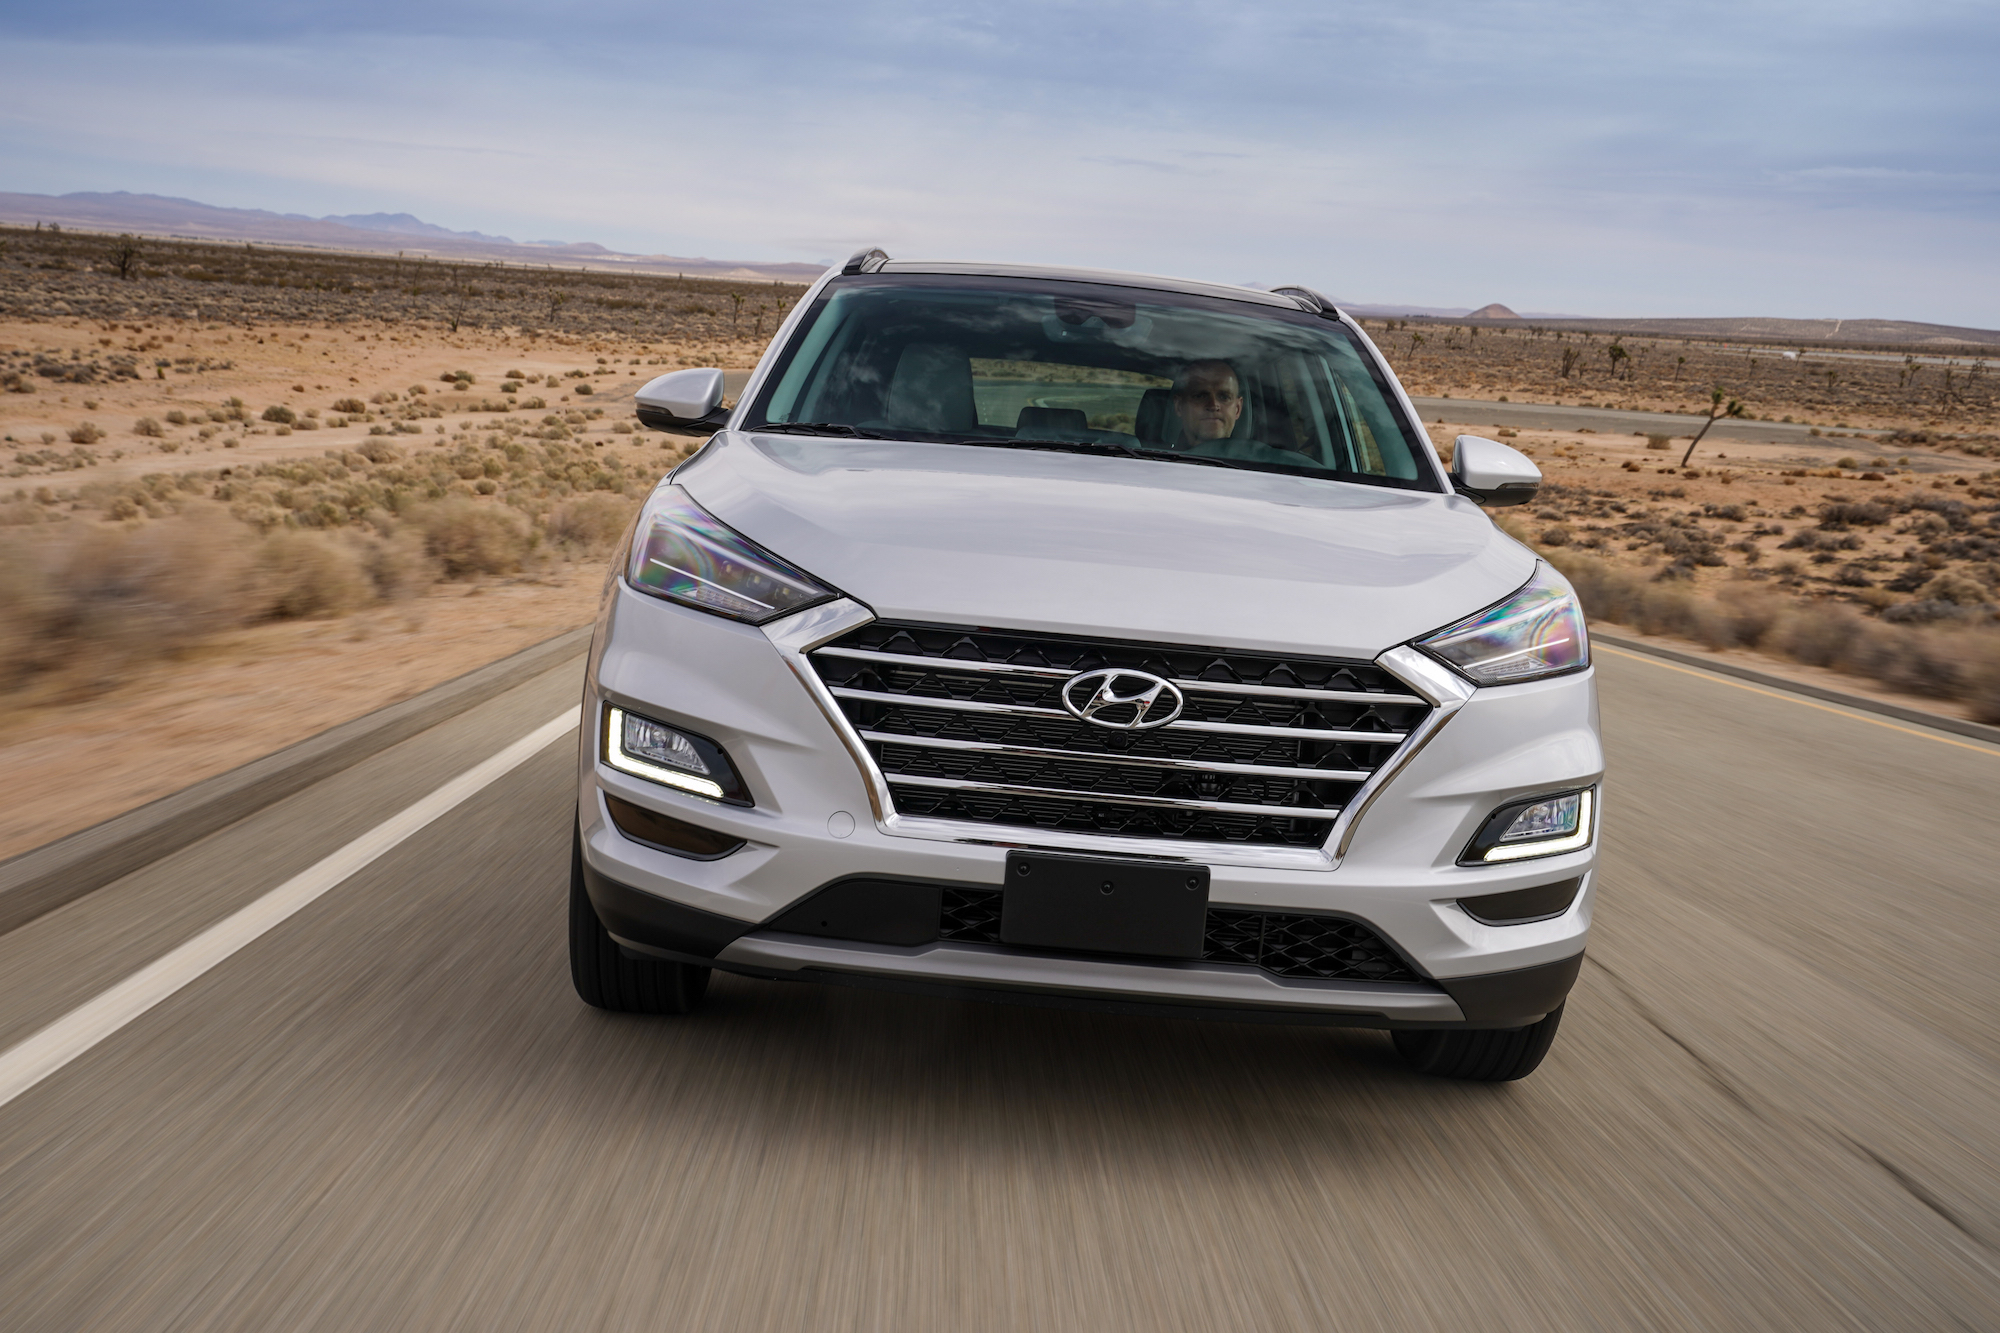 A white 2021 Hyundai Tucson compact crossover SUV traveling on a desert highway